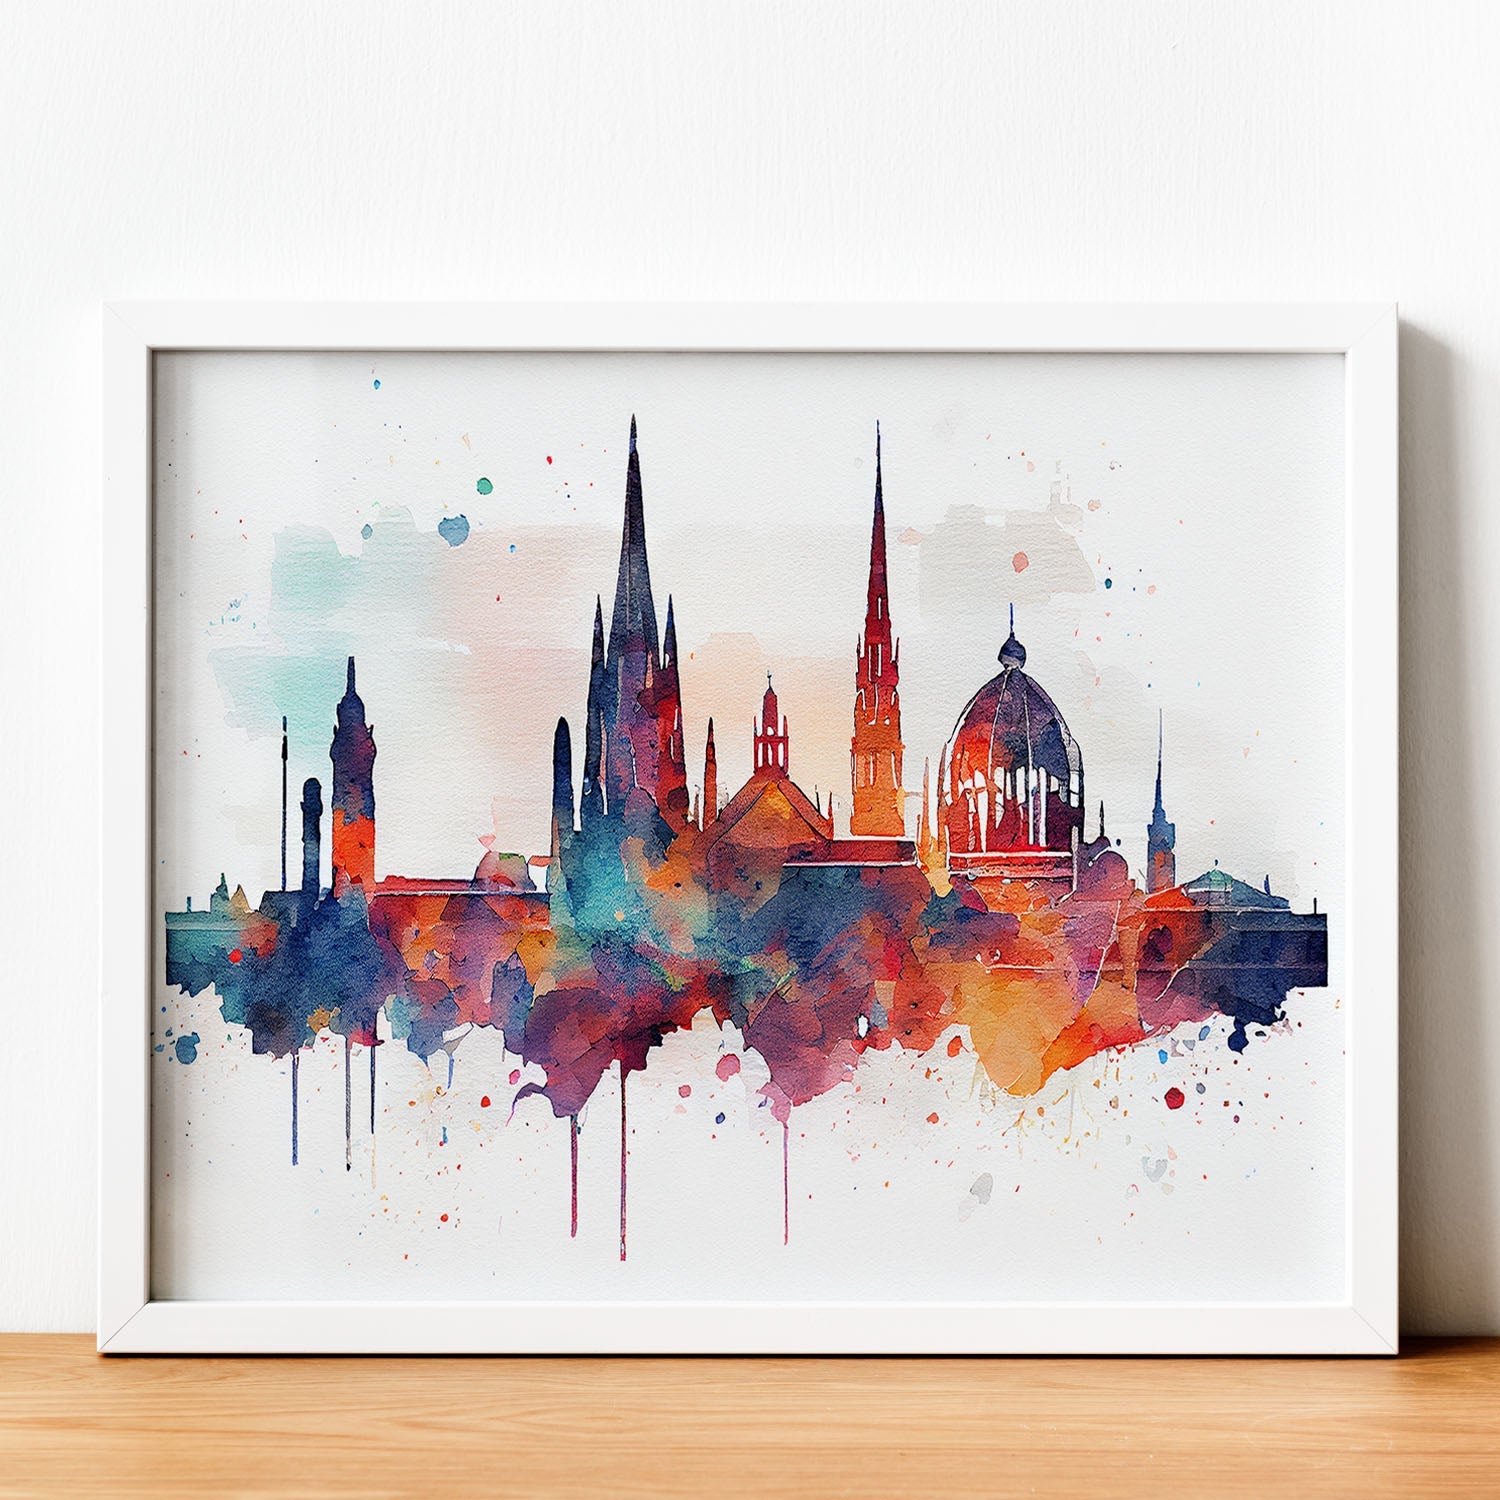 Nacnic watercolor of a skyline of the city of Vienna_2. Aesthetic Wall Art Prints for Bedroom or Living Room Design.-Artwork-Nacnic-A4-Sin Marco-Nacnic Estudio SL